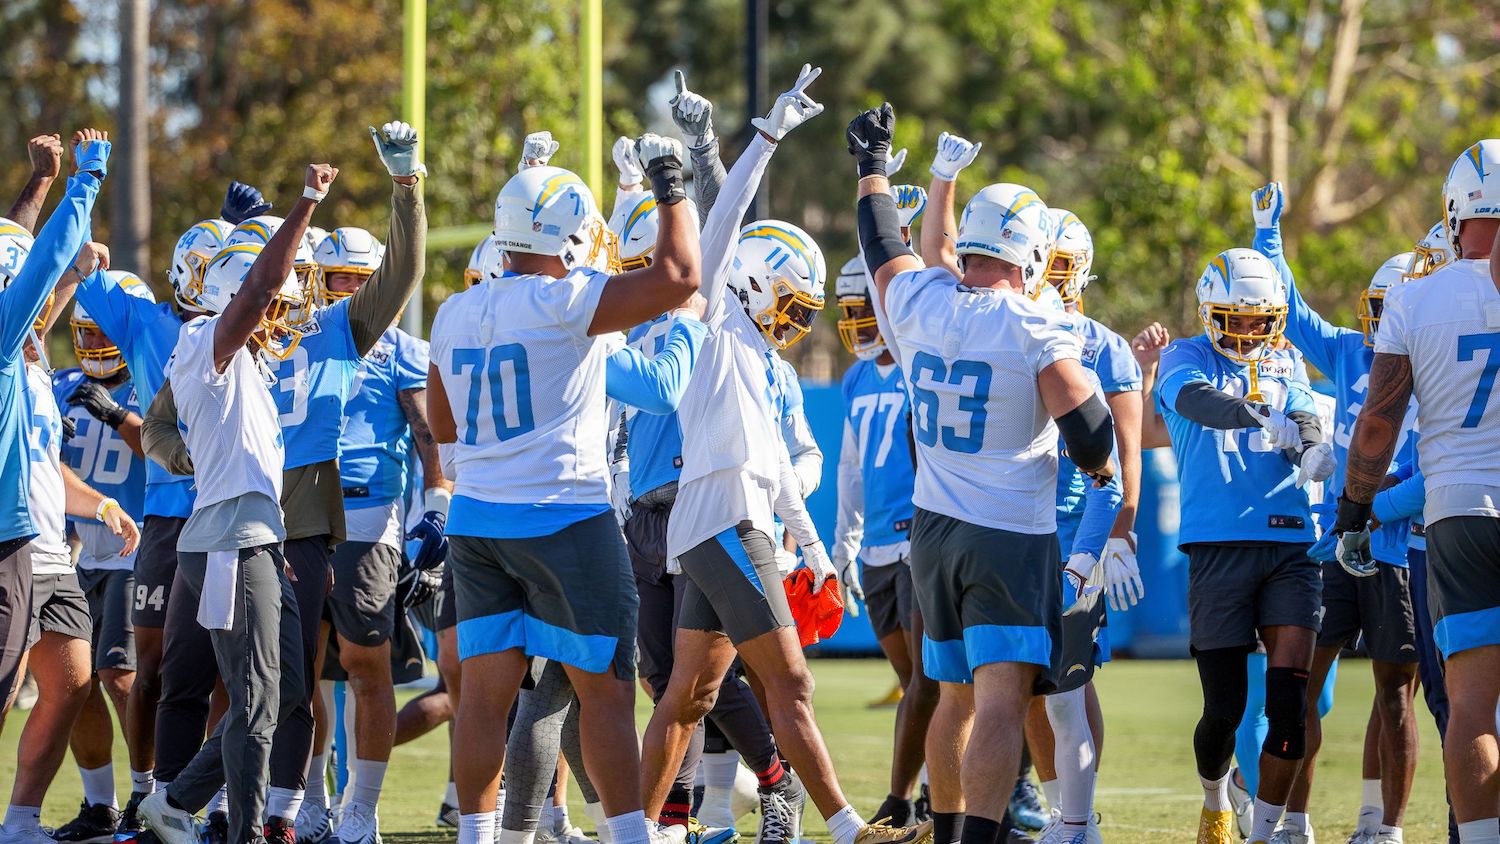 Los Angeles Chargers Final Practice Before Traveling To Denver. Photo Credit: Mike Nowak | LA Chargers